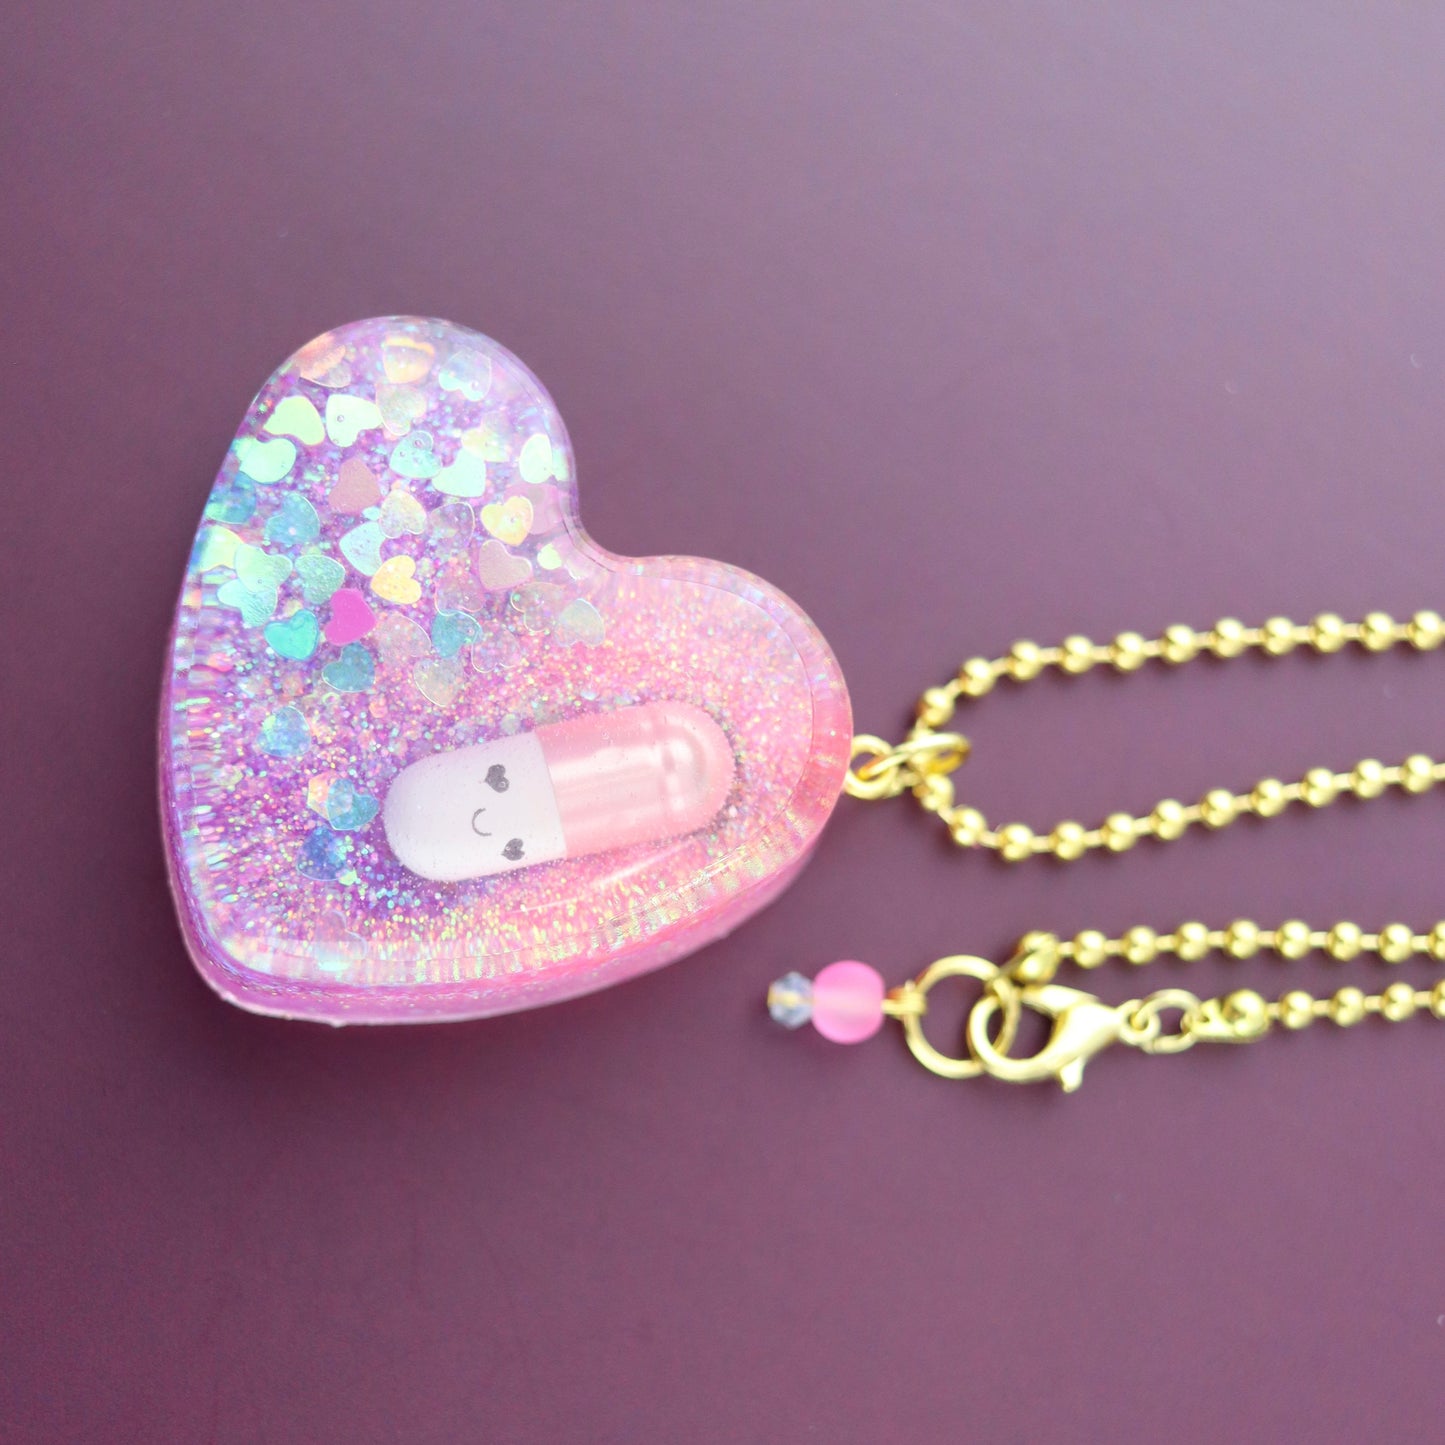 “Electro Pill Pop” OG Heart Necklace – with Gold Hardware NGH-1014